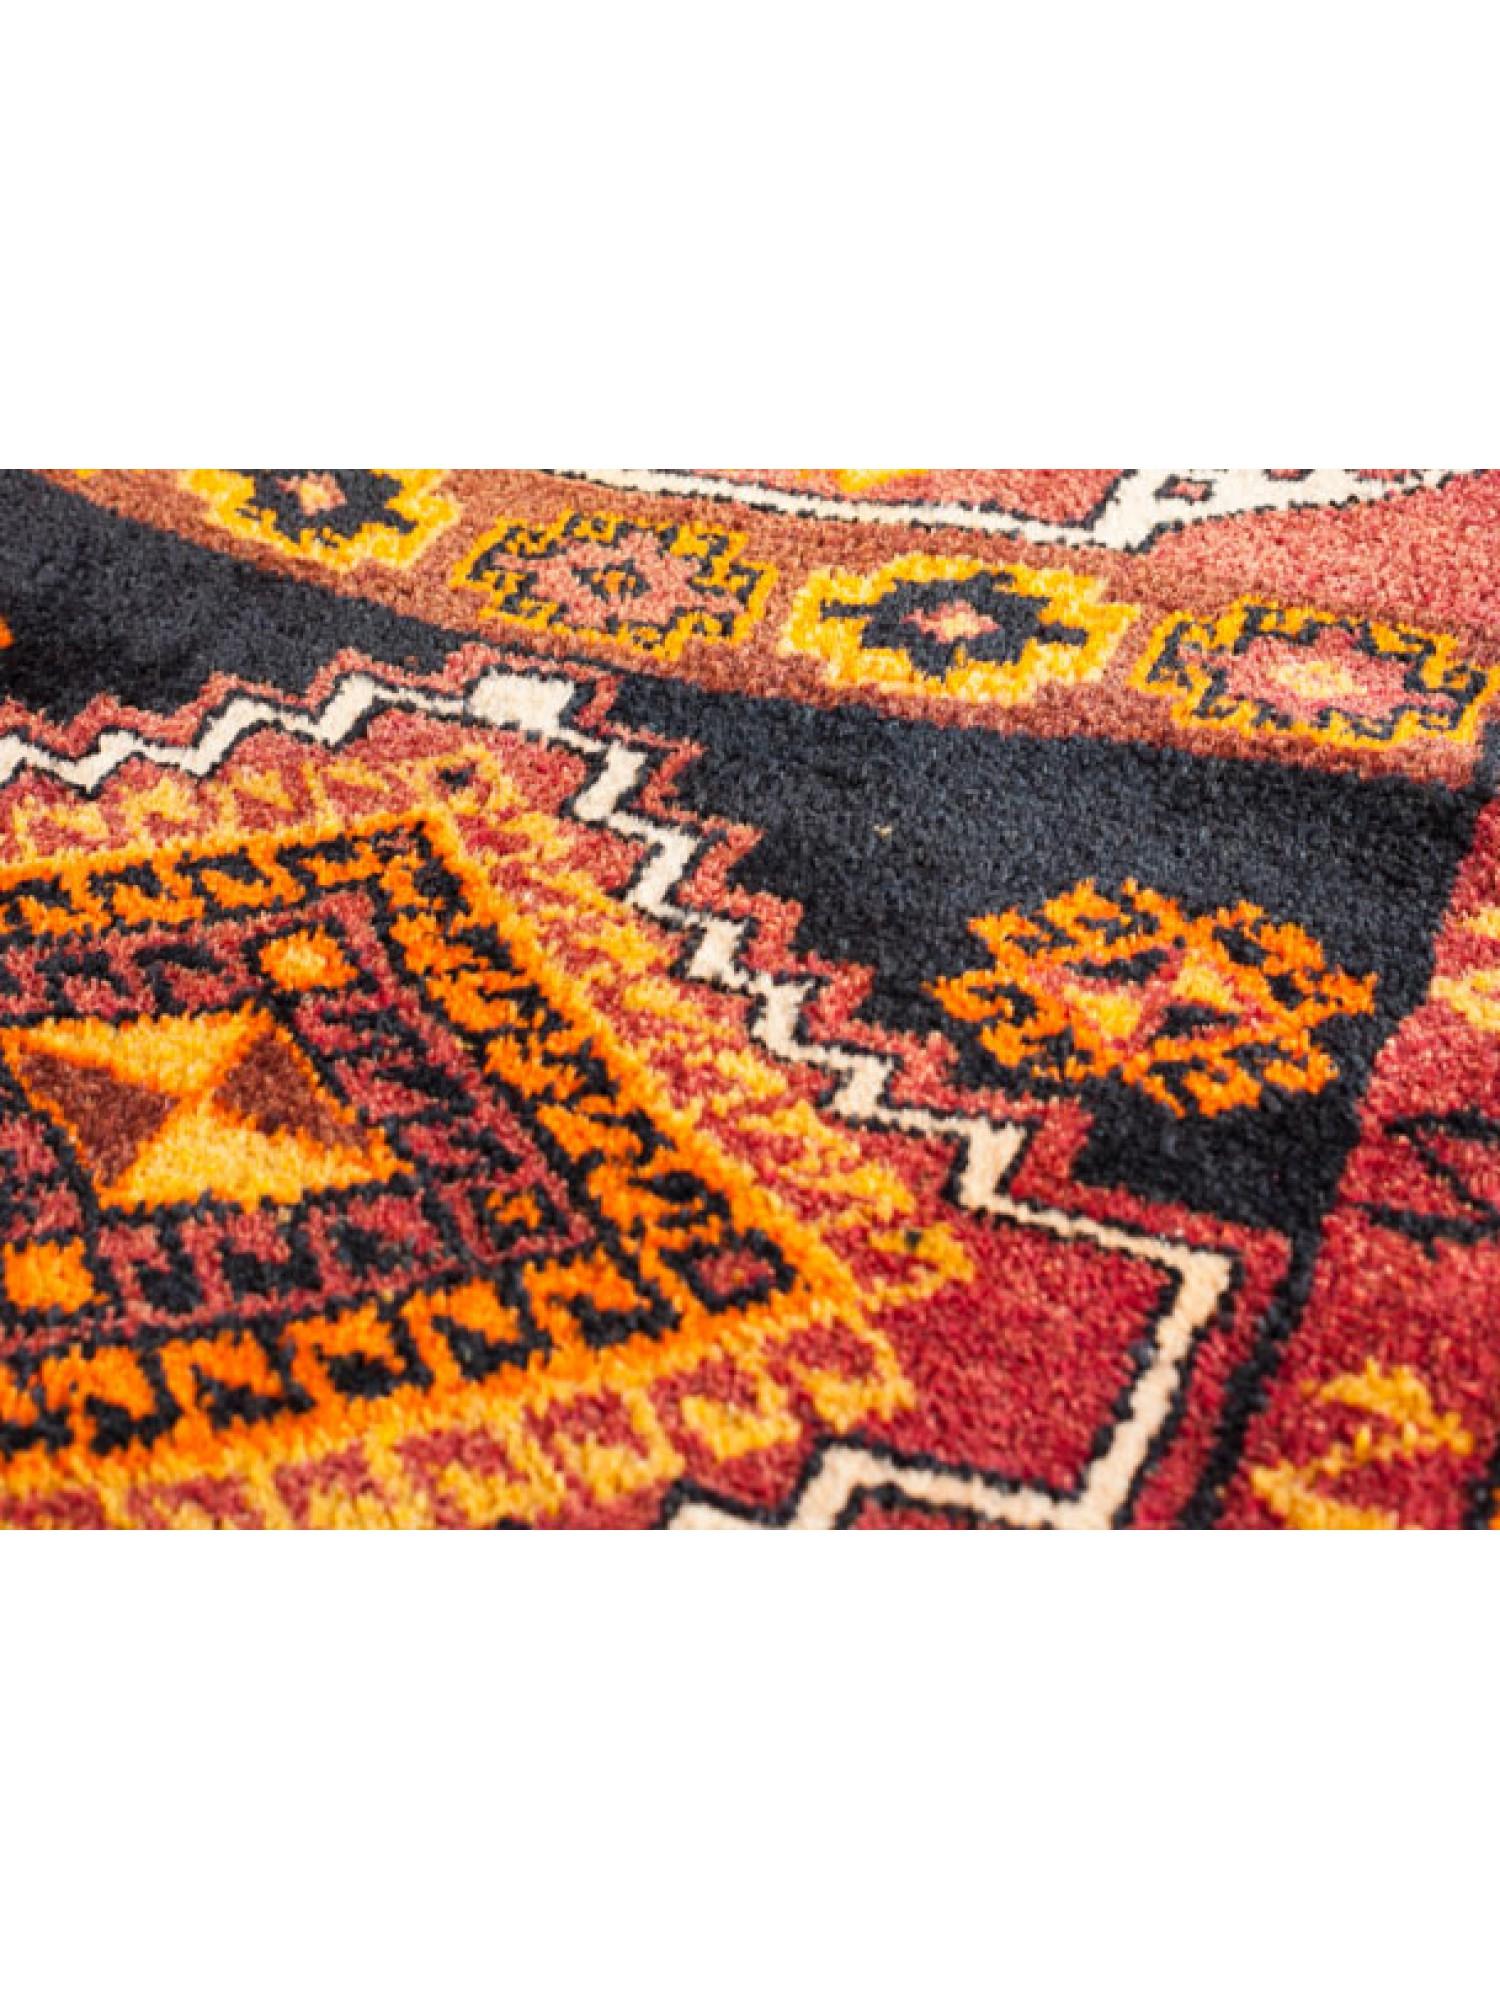 This is an Antique Kurdish Herki Rug from the Eastern Anatolia and Northern Iraqi region with a rare and beautiful color composition.

Iraqi Kurds are mainly concentrated within a mountainous region of north and north-east Iraq. Originally a